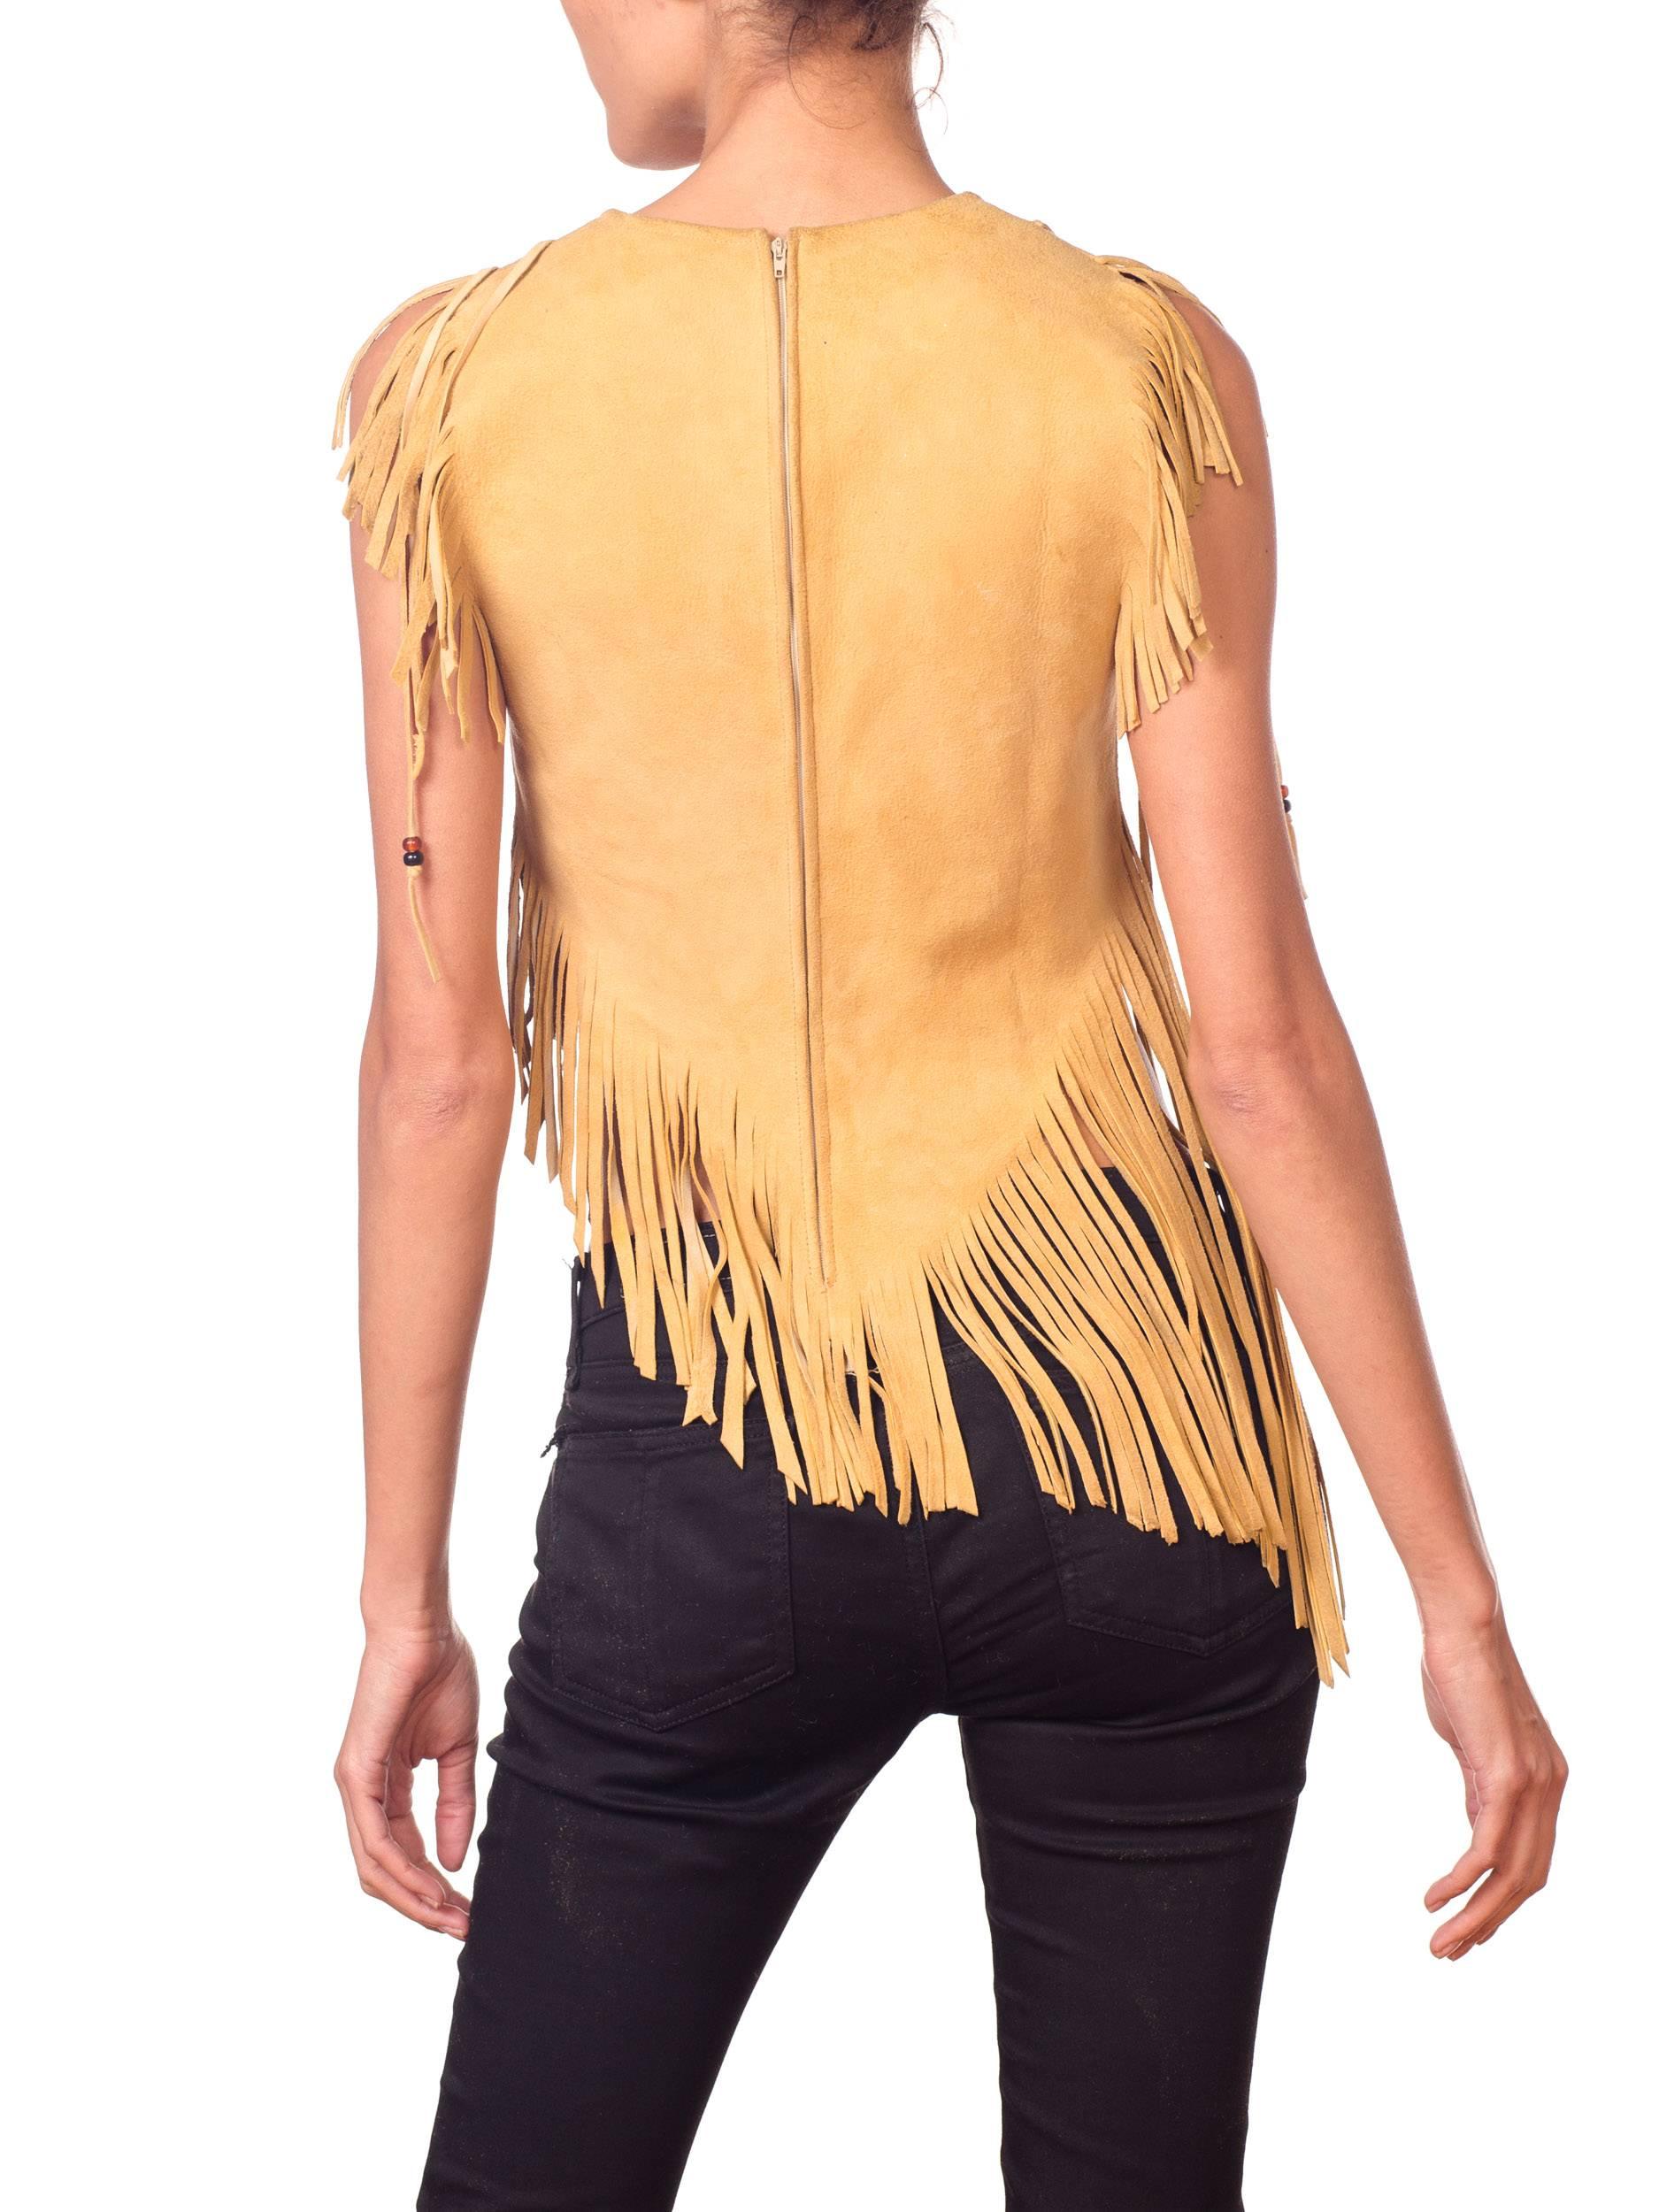 Orange 1970S Yellow Tan Suede Leather Beaded Fringe Lace Up Crop Tops Shirt